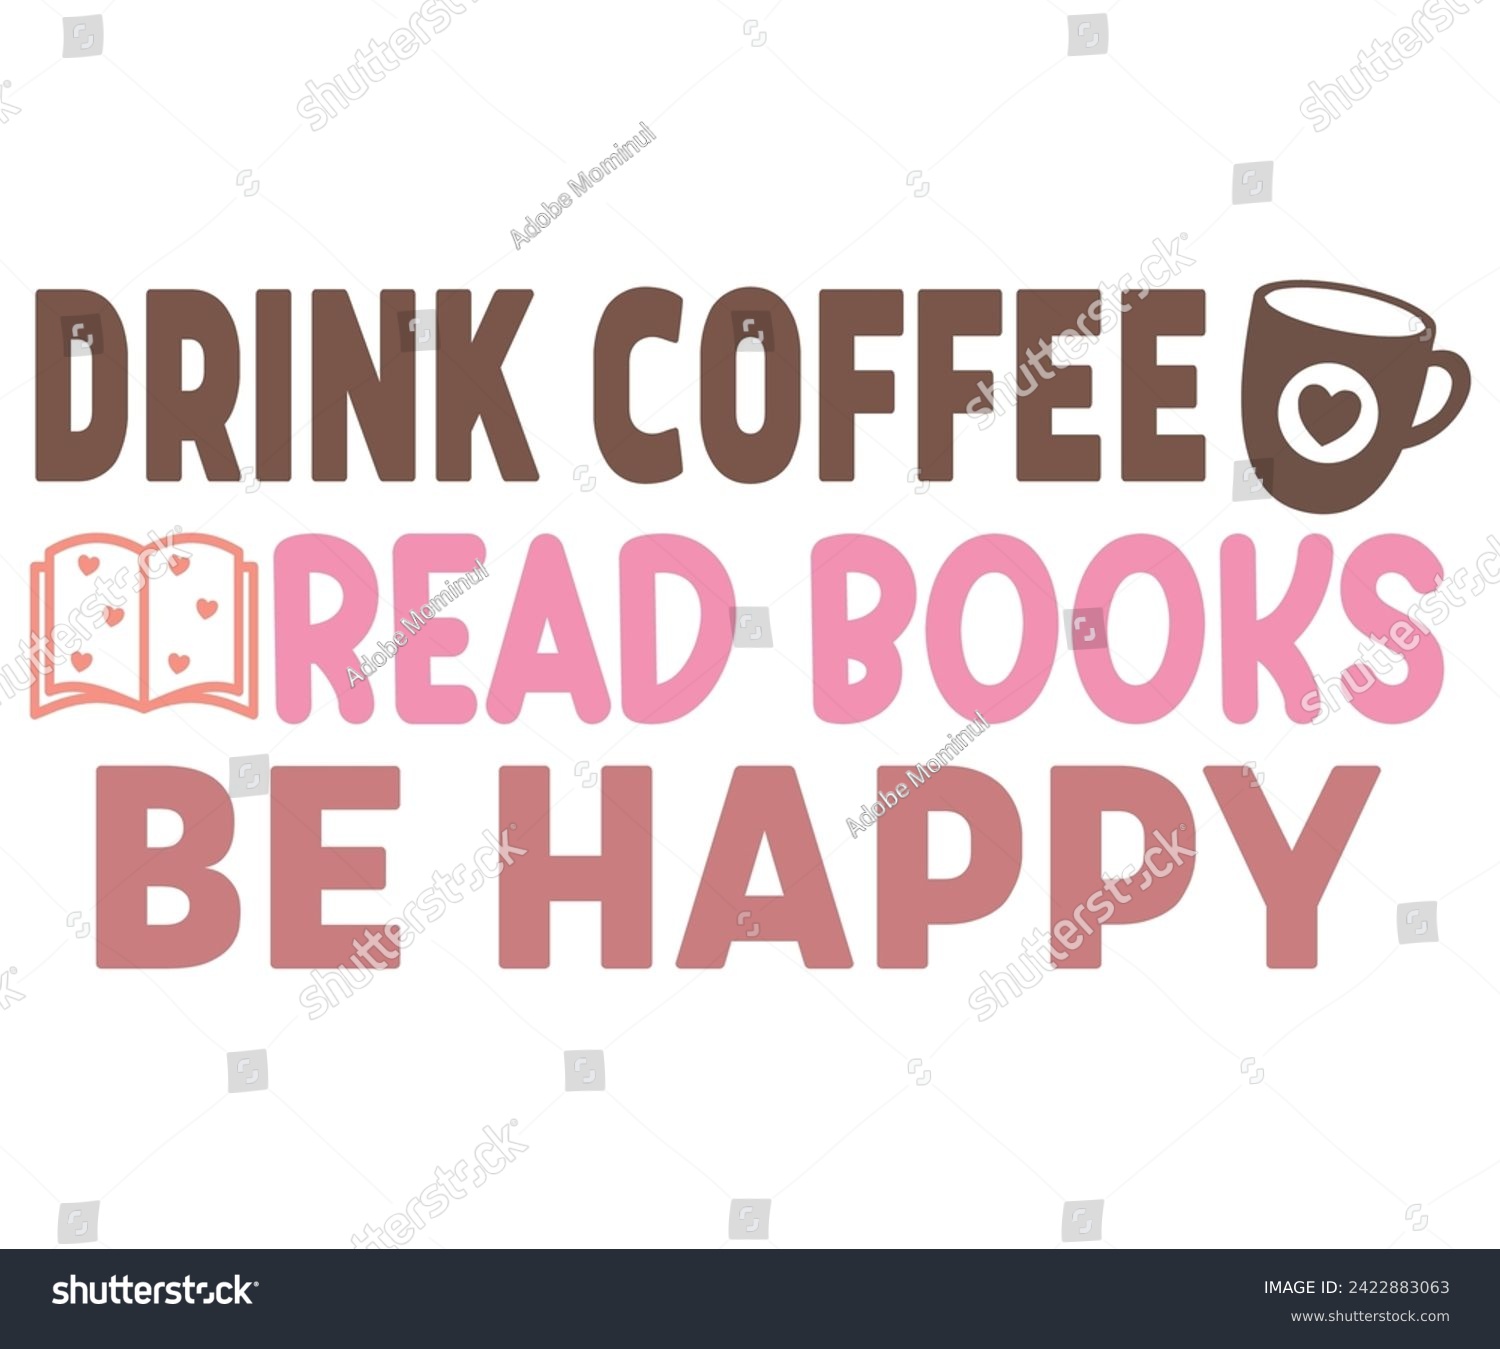 SVG of Drink Coffee Read Books Be Happy Svg,Coffee Svg,Coffee Retro,Funny Coffee Sayings,Coffee Mug Svg,Coffee Cup Svg,Gift For Coffee,Coffee Lover,Caffeine Svg,Svg Cut File,Coffee Quotes,Sublimation Design, svg